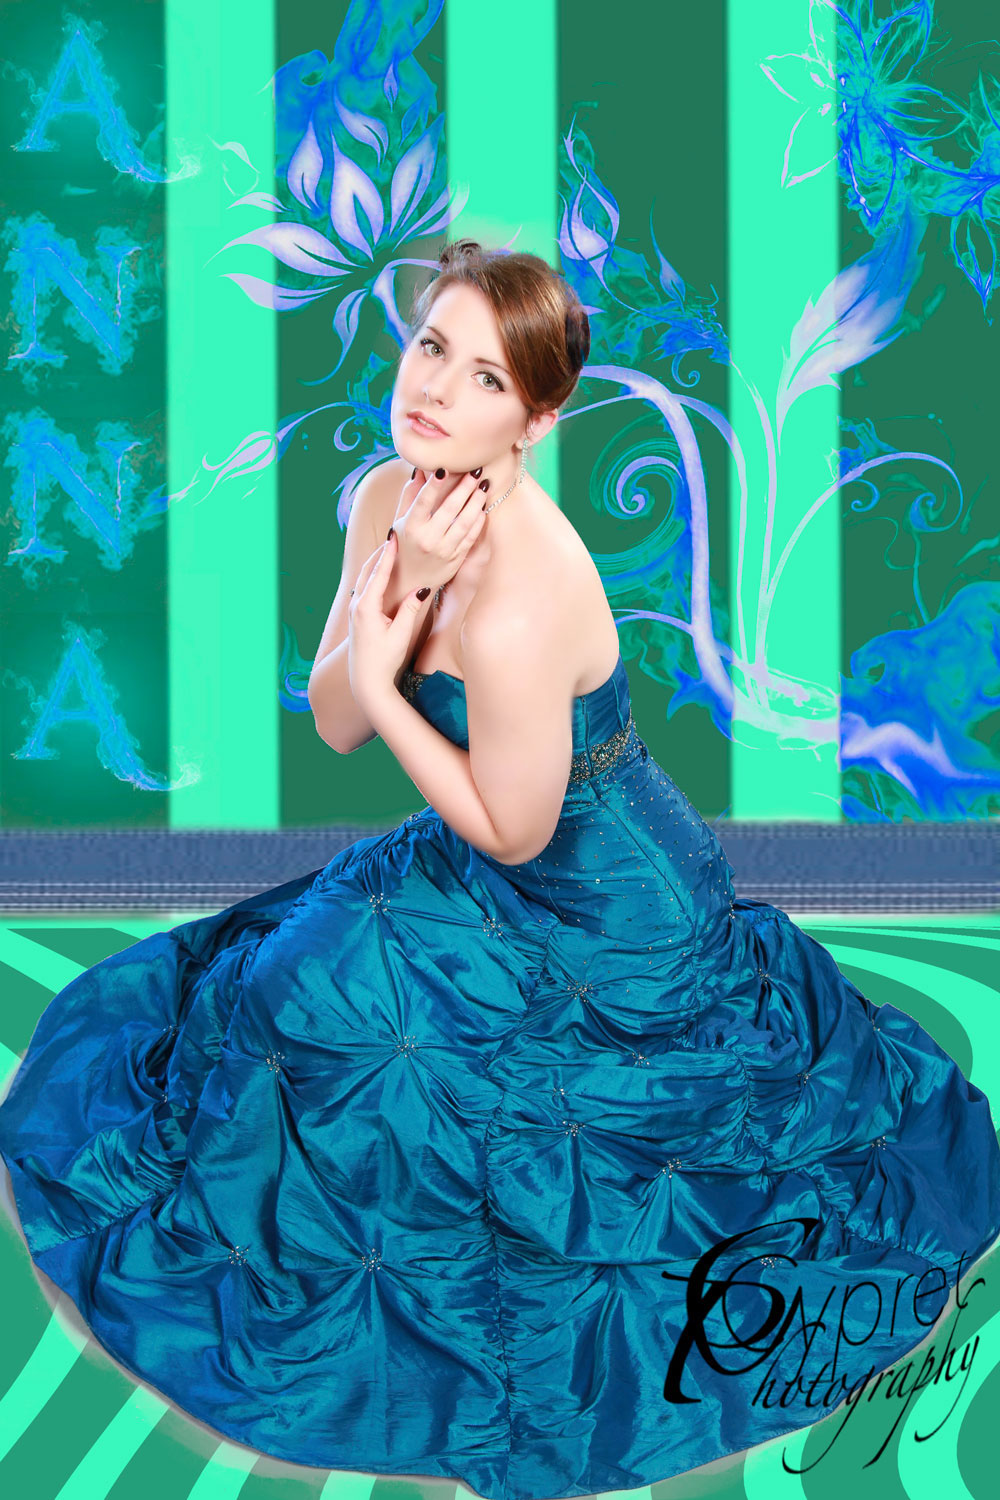 Beautiful blue model pic design graphics Huntsville alabama south southernphotography cool sweet awesome great dress